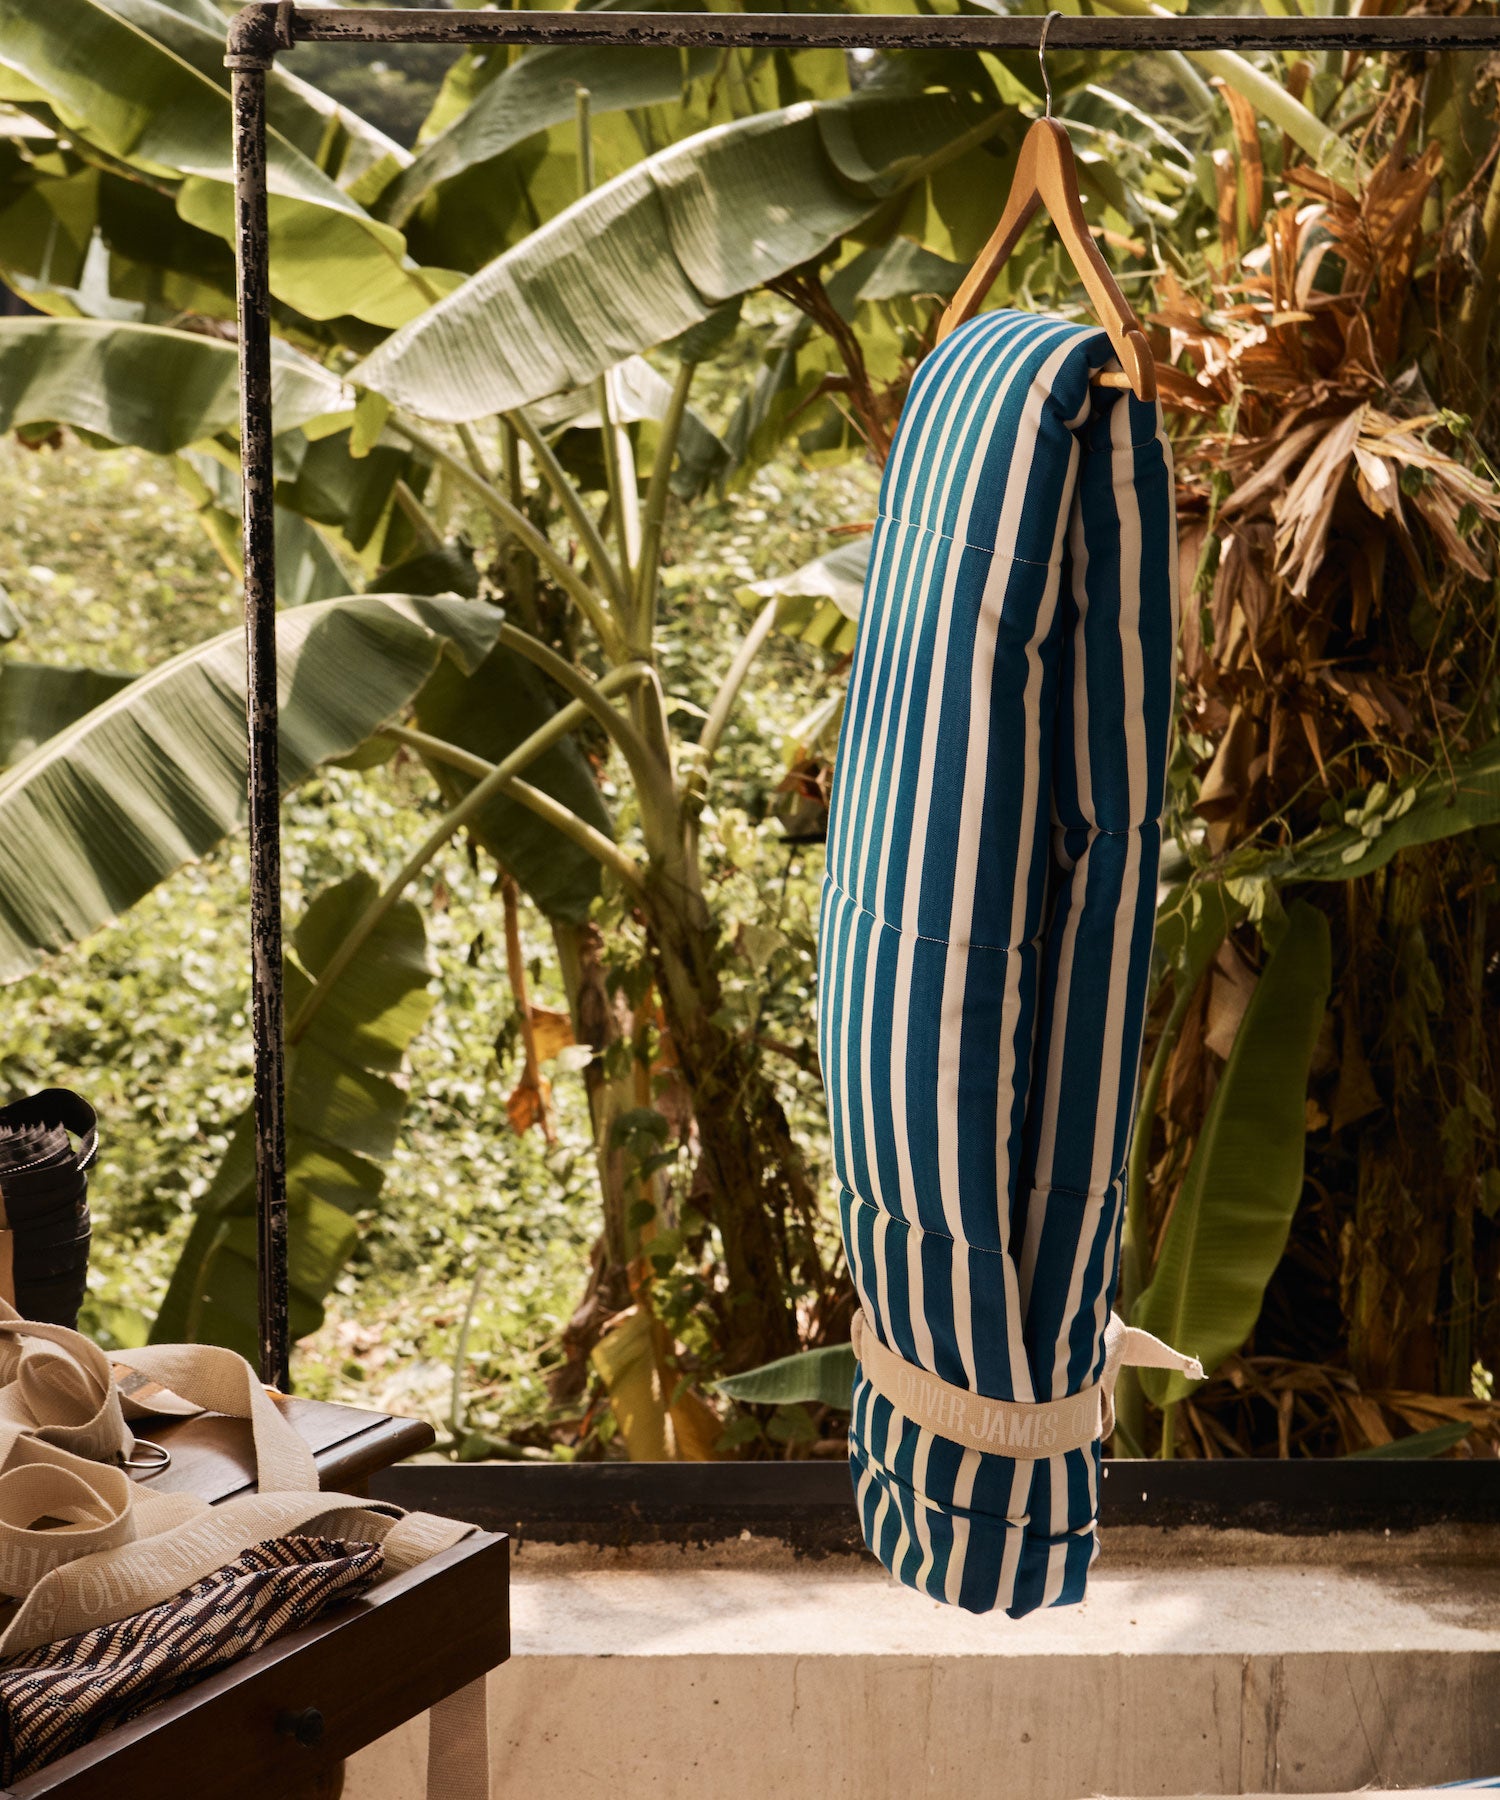 A pool float for adults cover hanging on a cloths rack with tropical plants in the background and luxury lilo components in the foreground.